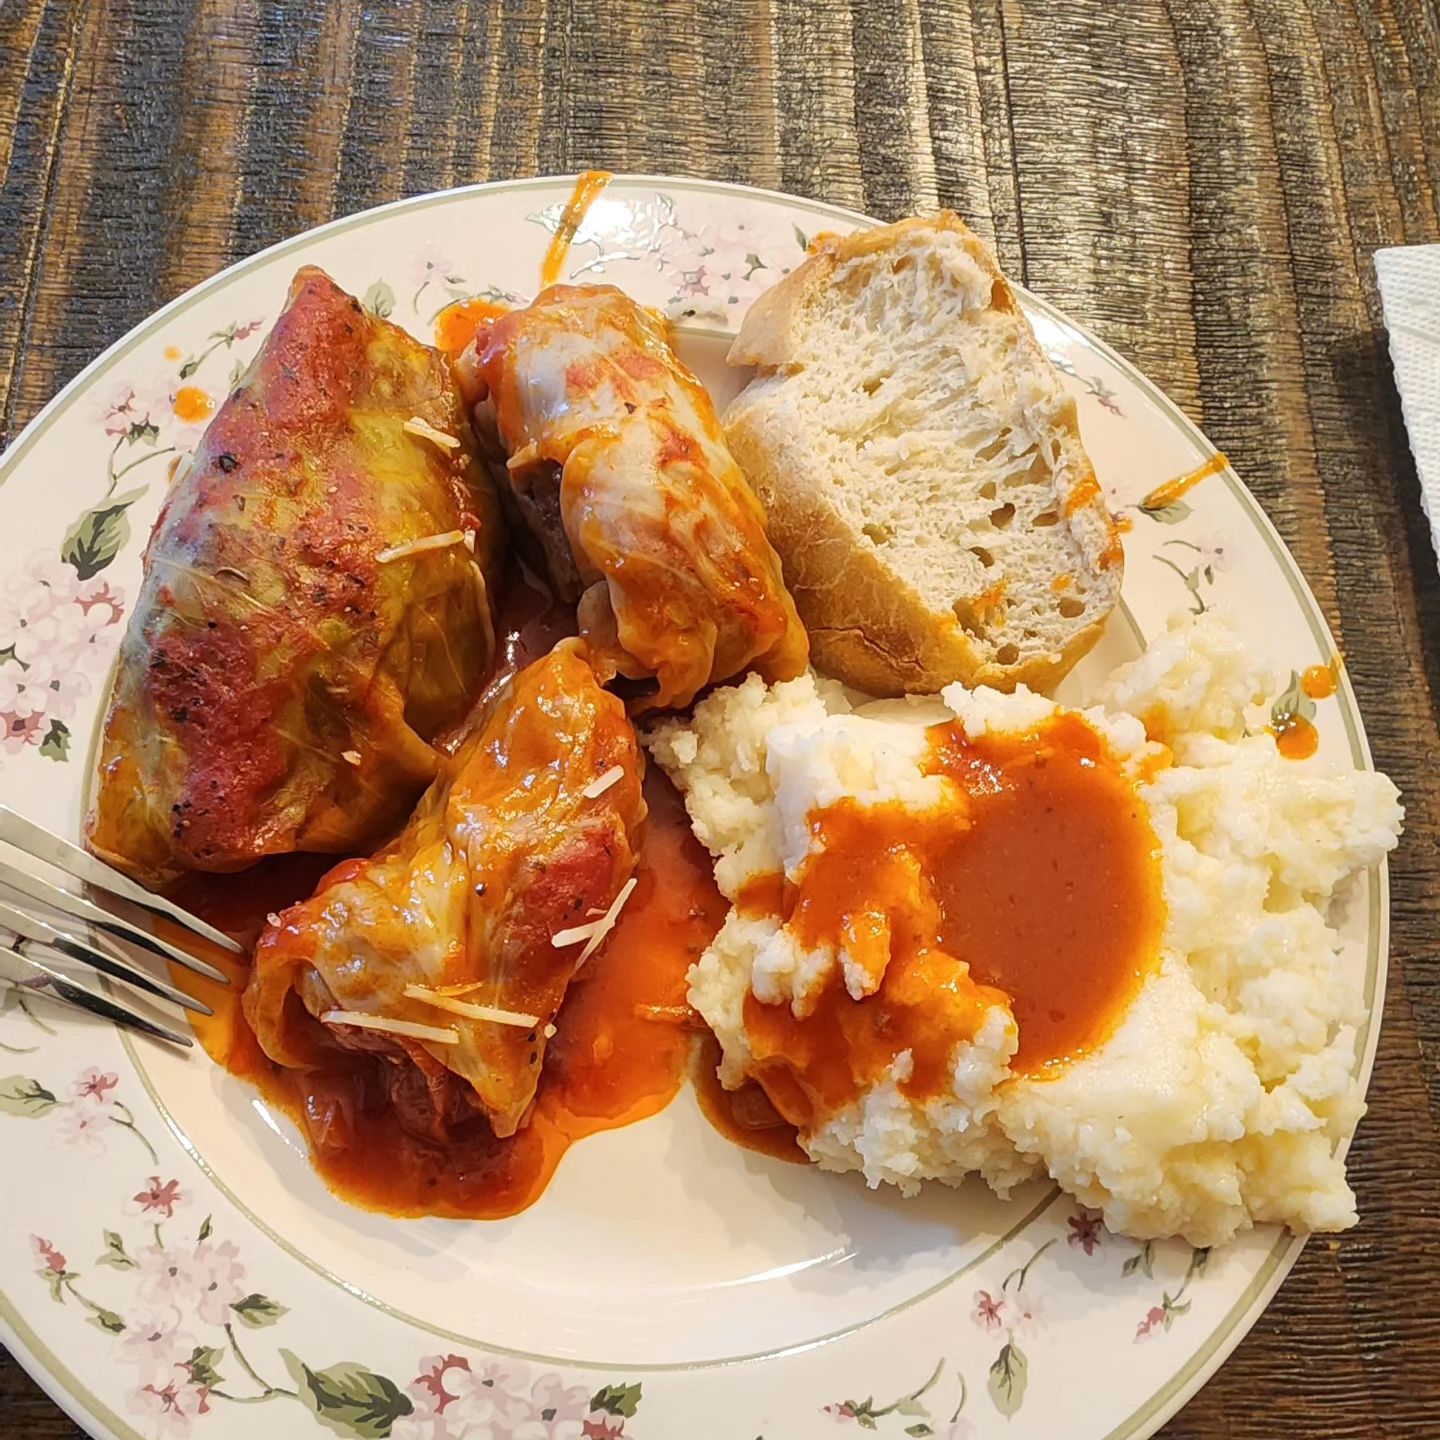 3 stuffed cabbage rolls & mashed potatoes on a plate, with a side of bread.